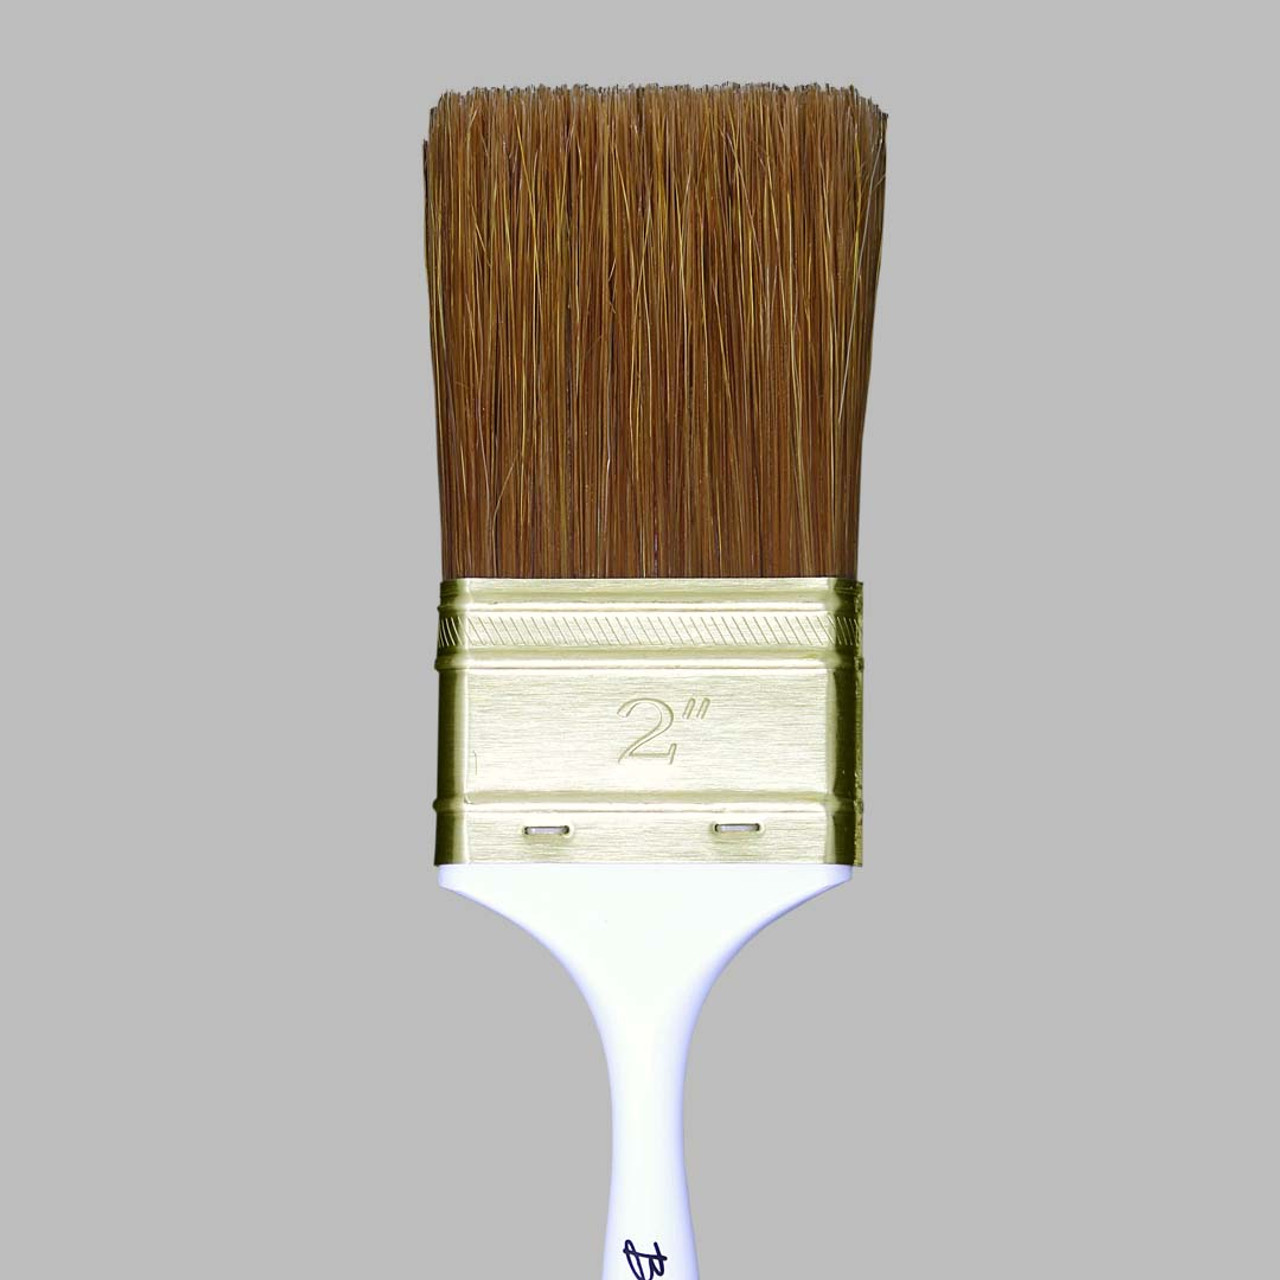 2 inch Paint Brushes